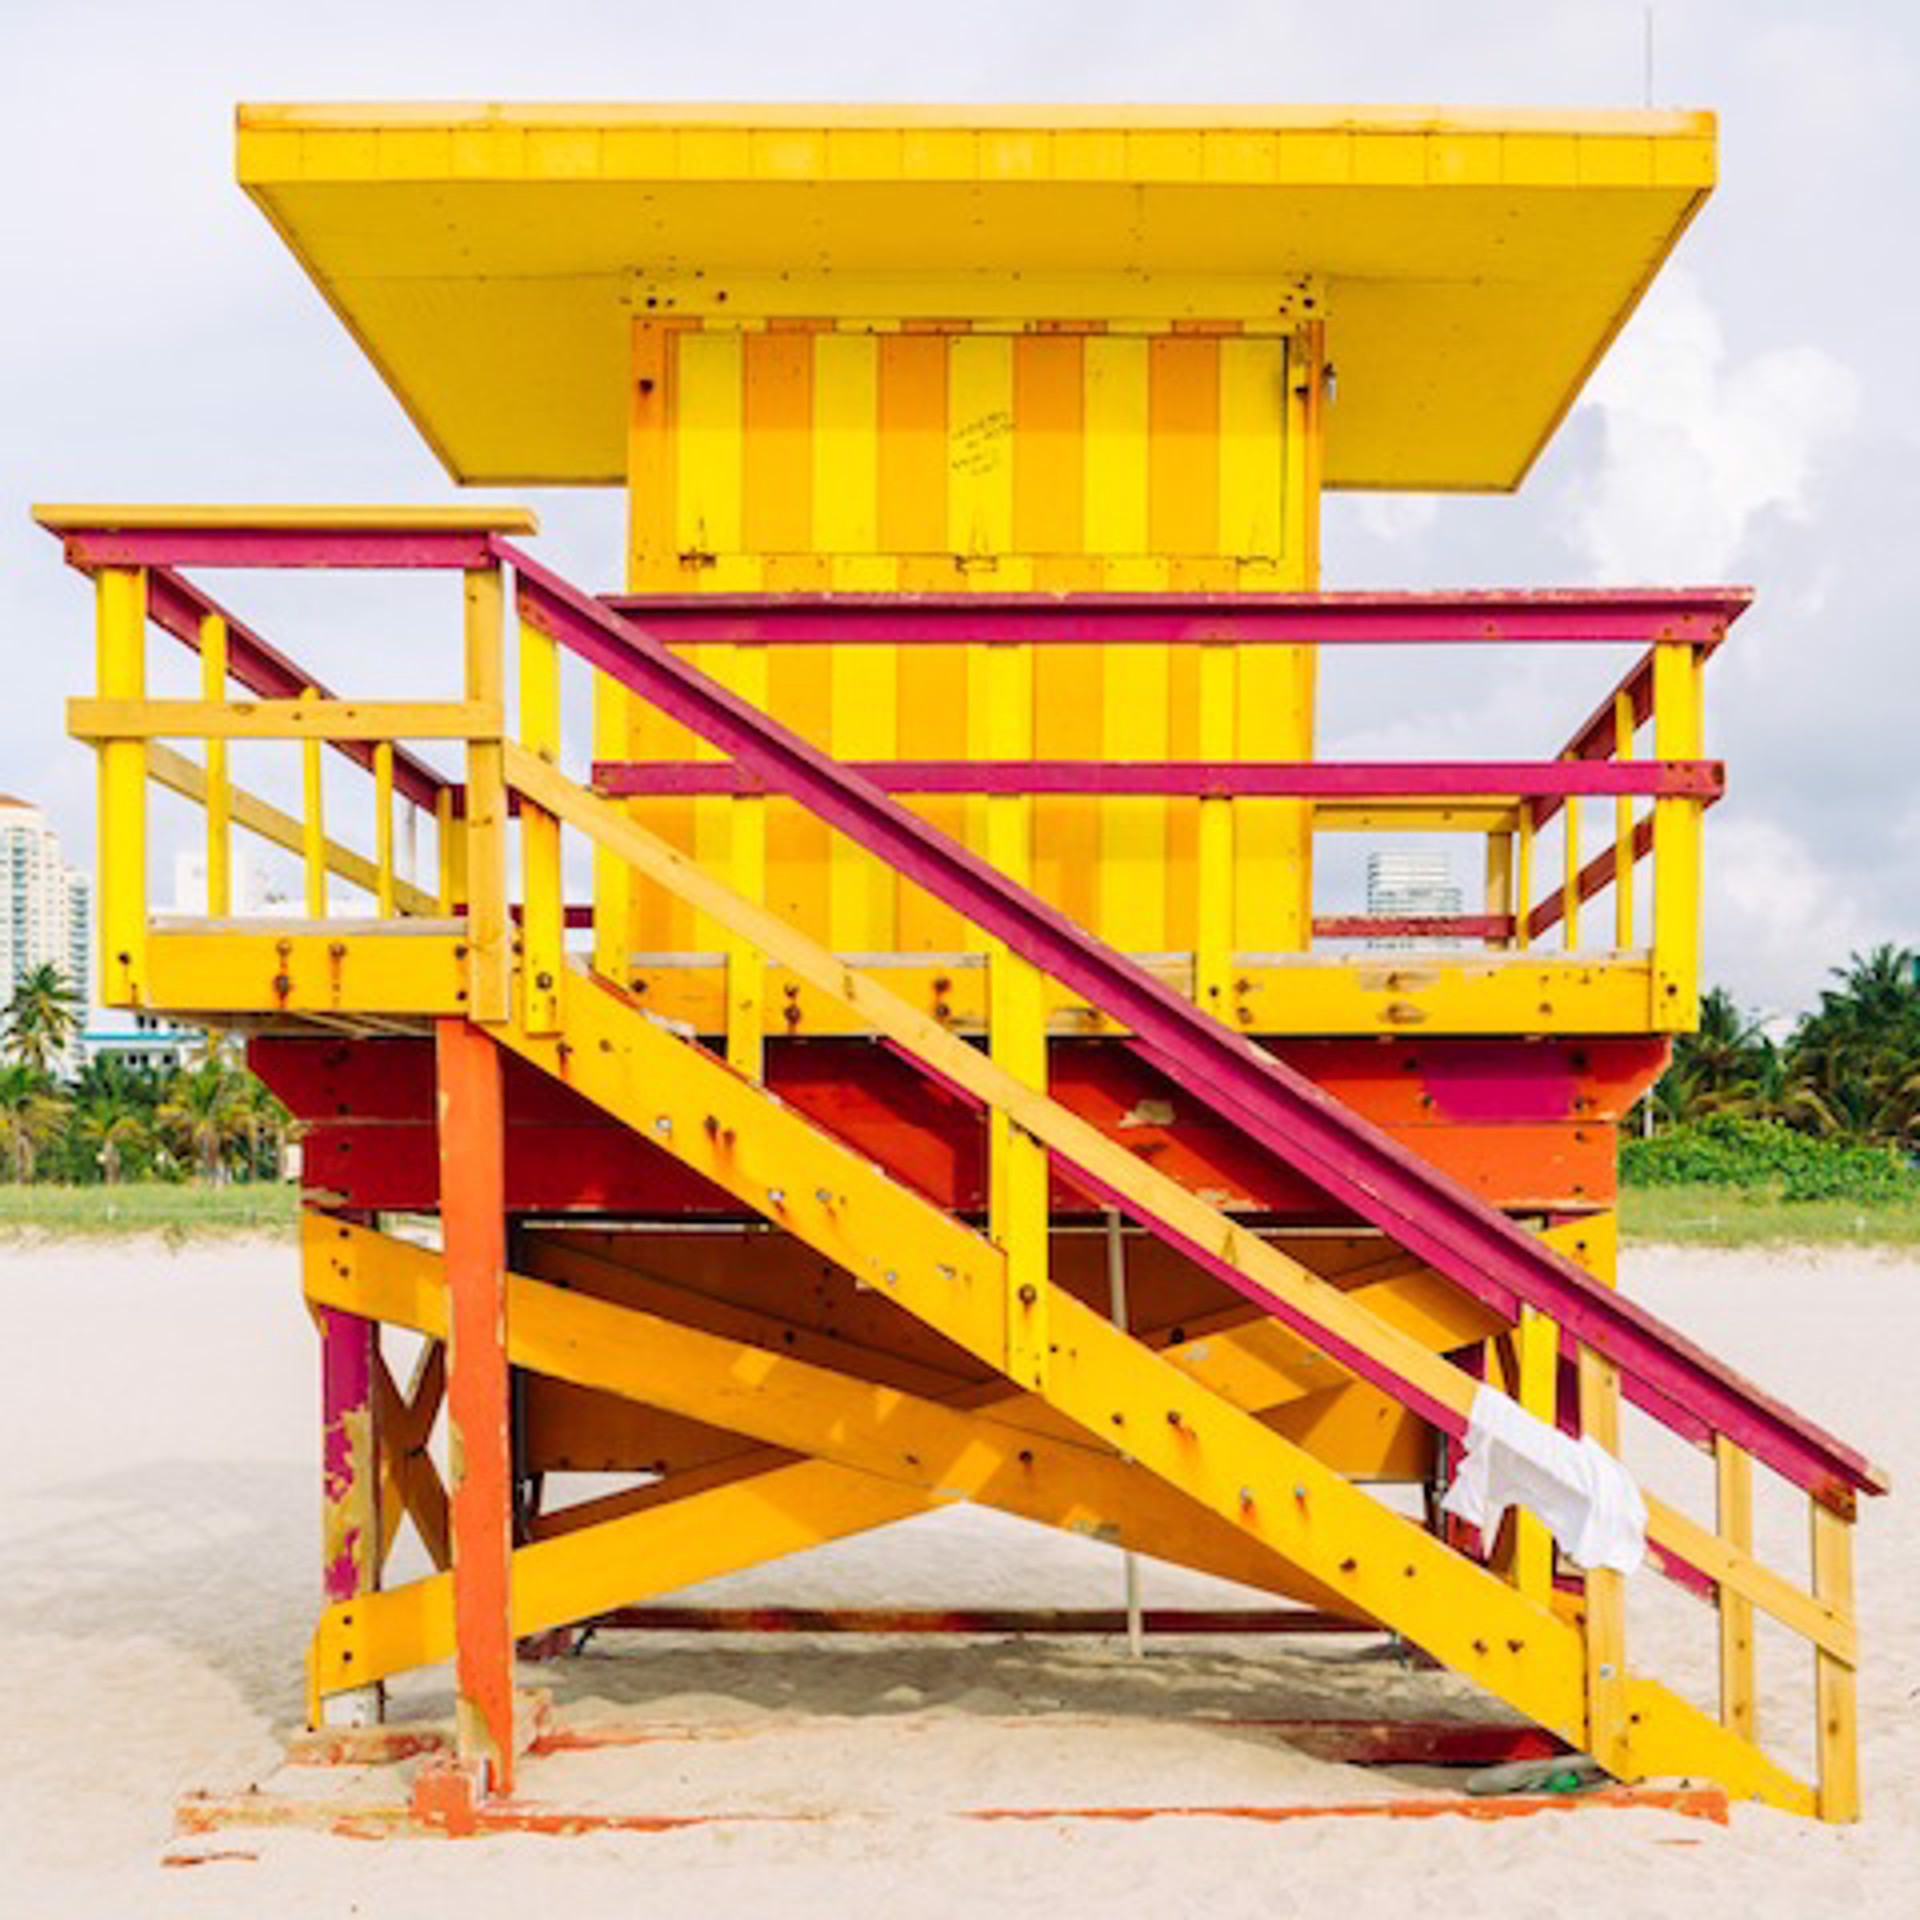 3rd Street Lifeguard Stand by Peter Mendelson